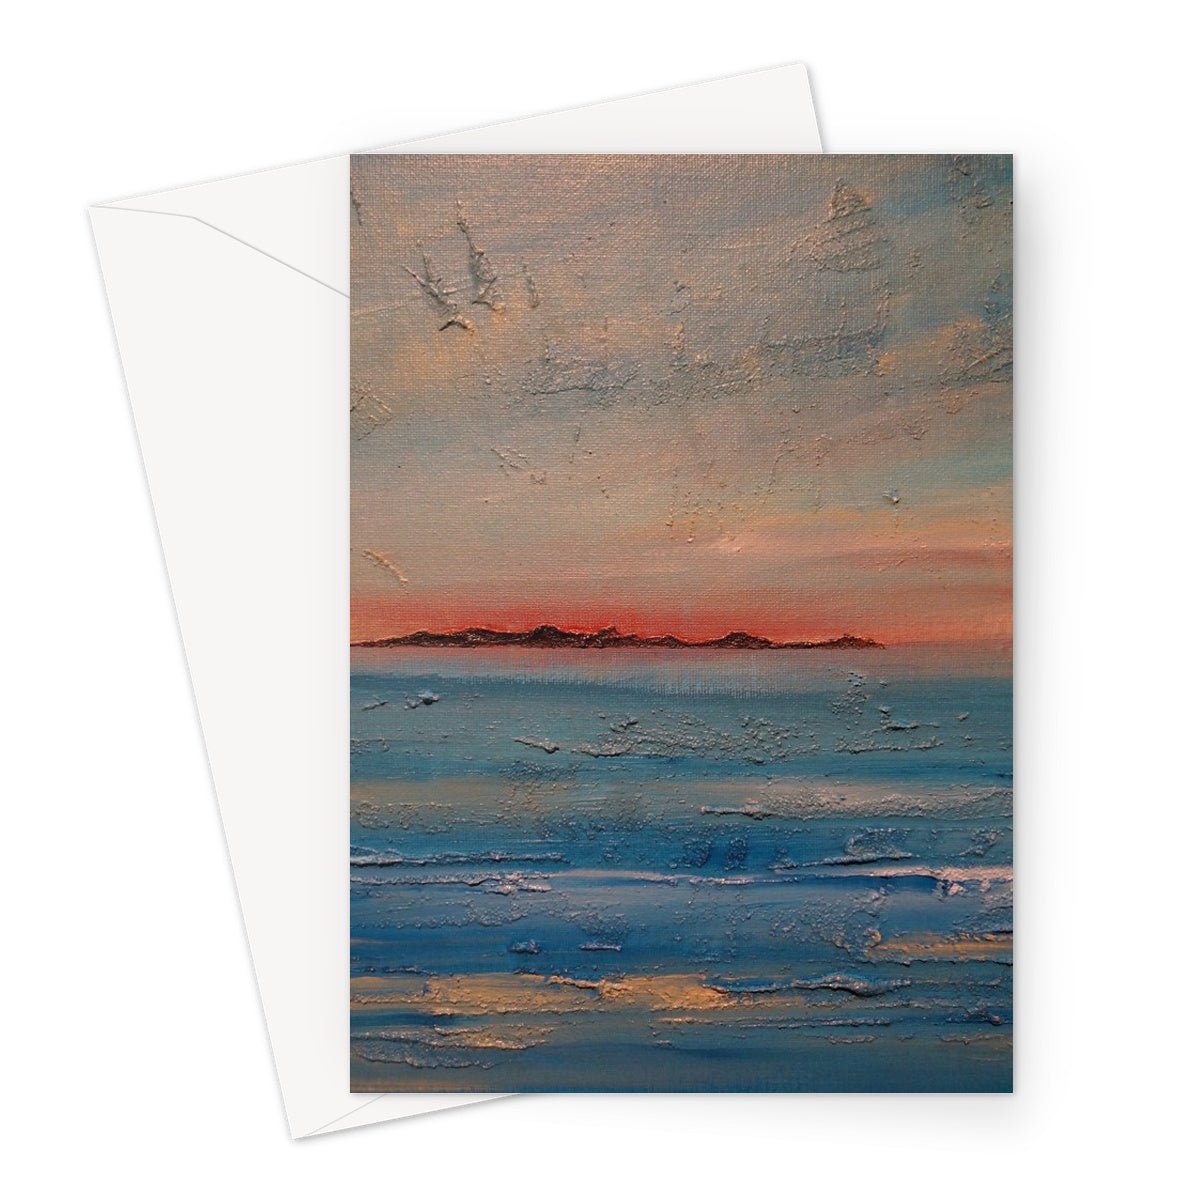 Gigha Sunset Art Gifts Greeting Card-Greetings Cards-Hebridean Islands Art Gallery-A5 Portrait-10 Cards-Paintings, Prints, Homeware, Art Gifts From Scotland By Scottish Artist Kevin Hunter